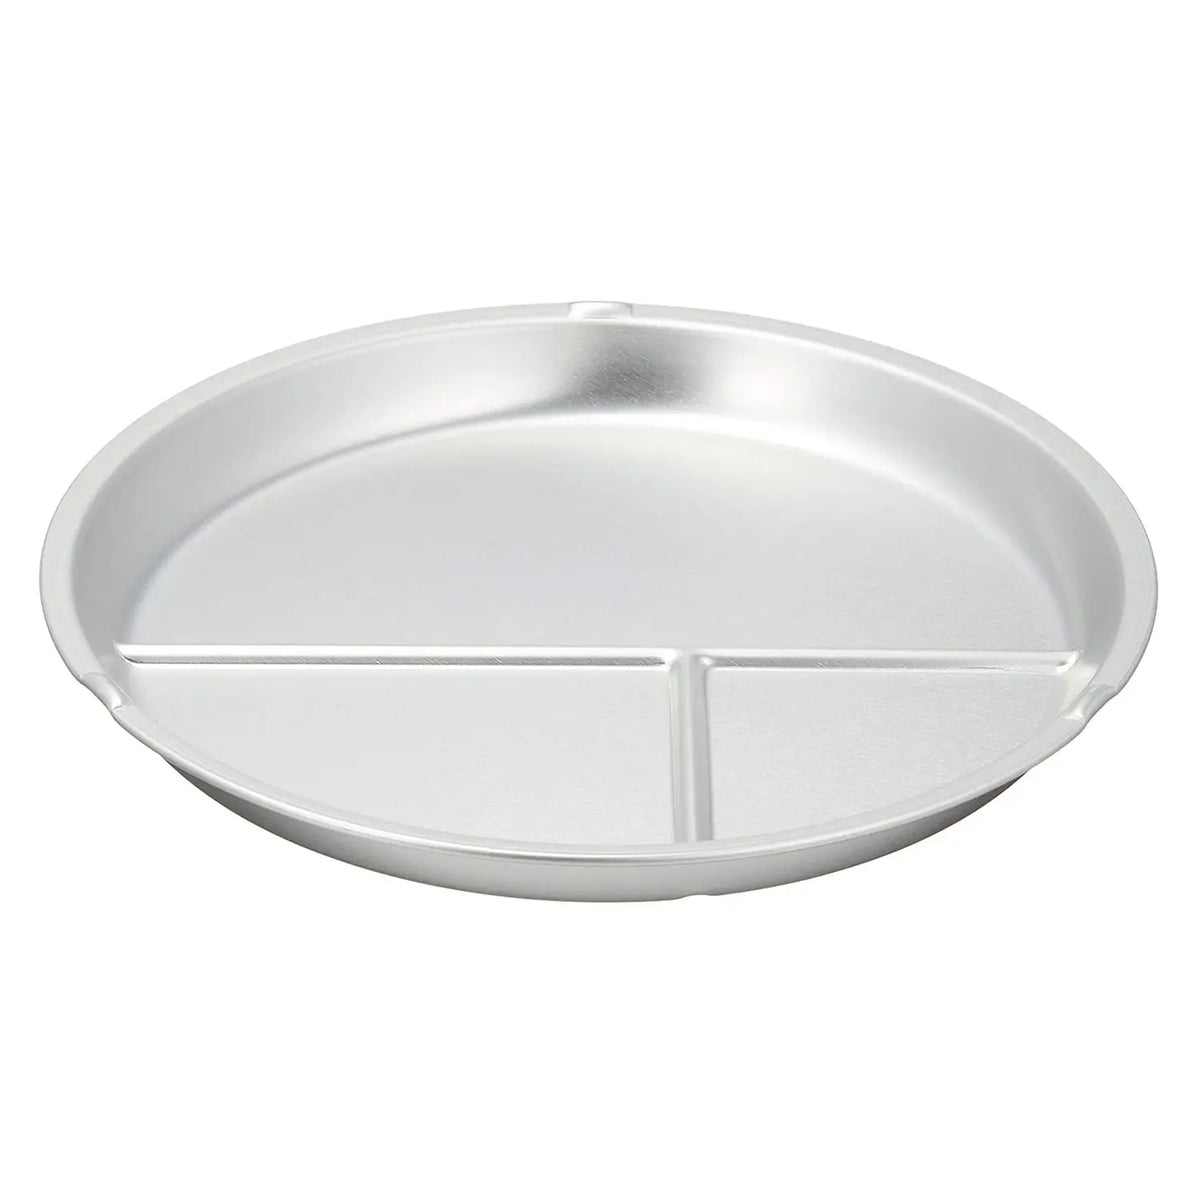 Ooi Metals Silver Anodized Aluminium Lunch Plate